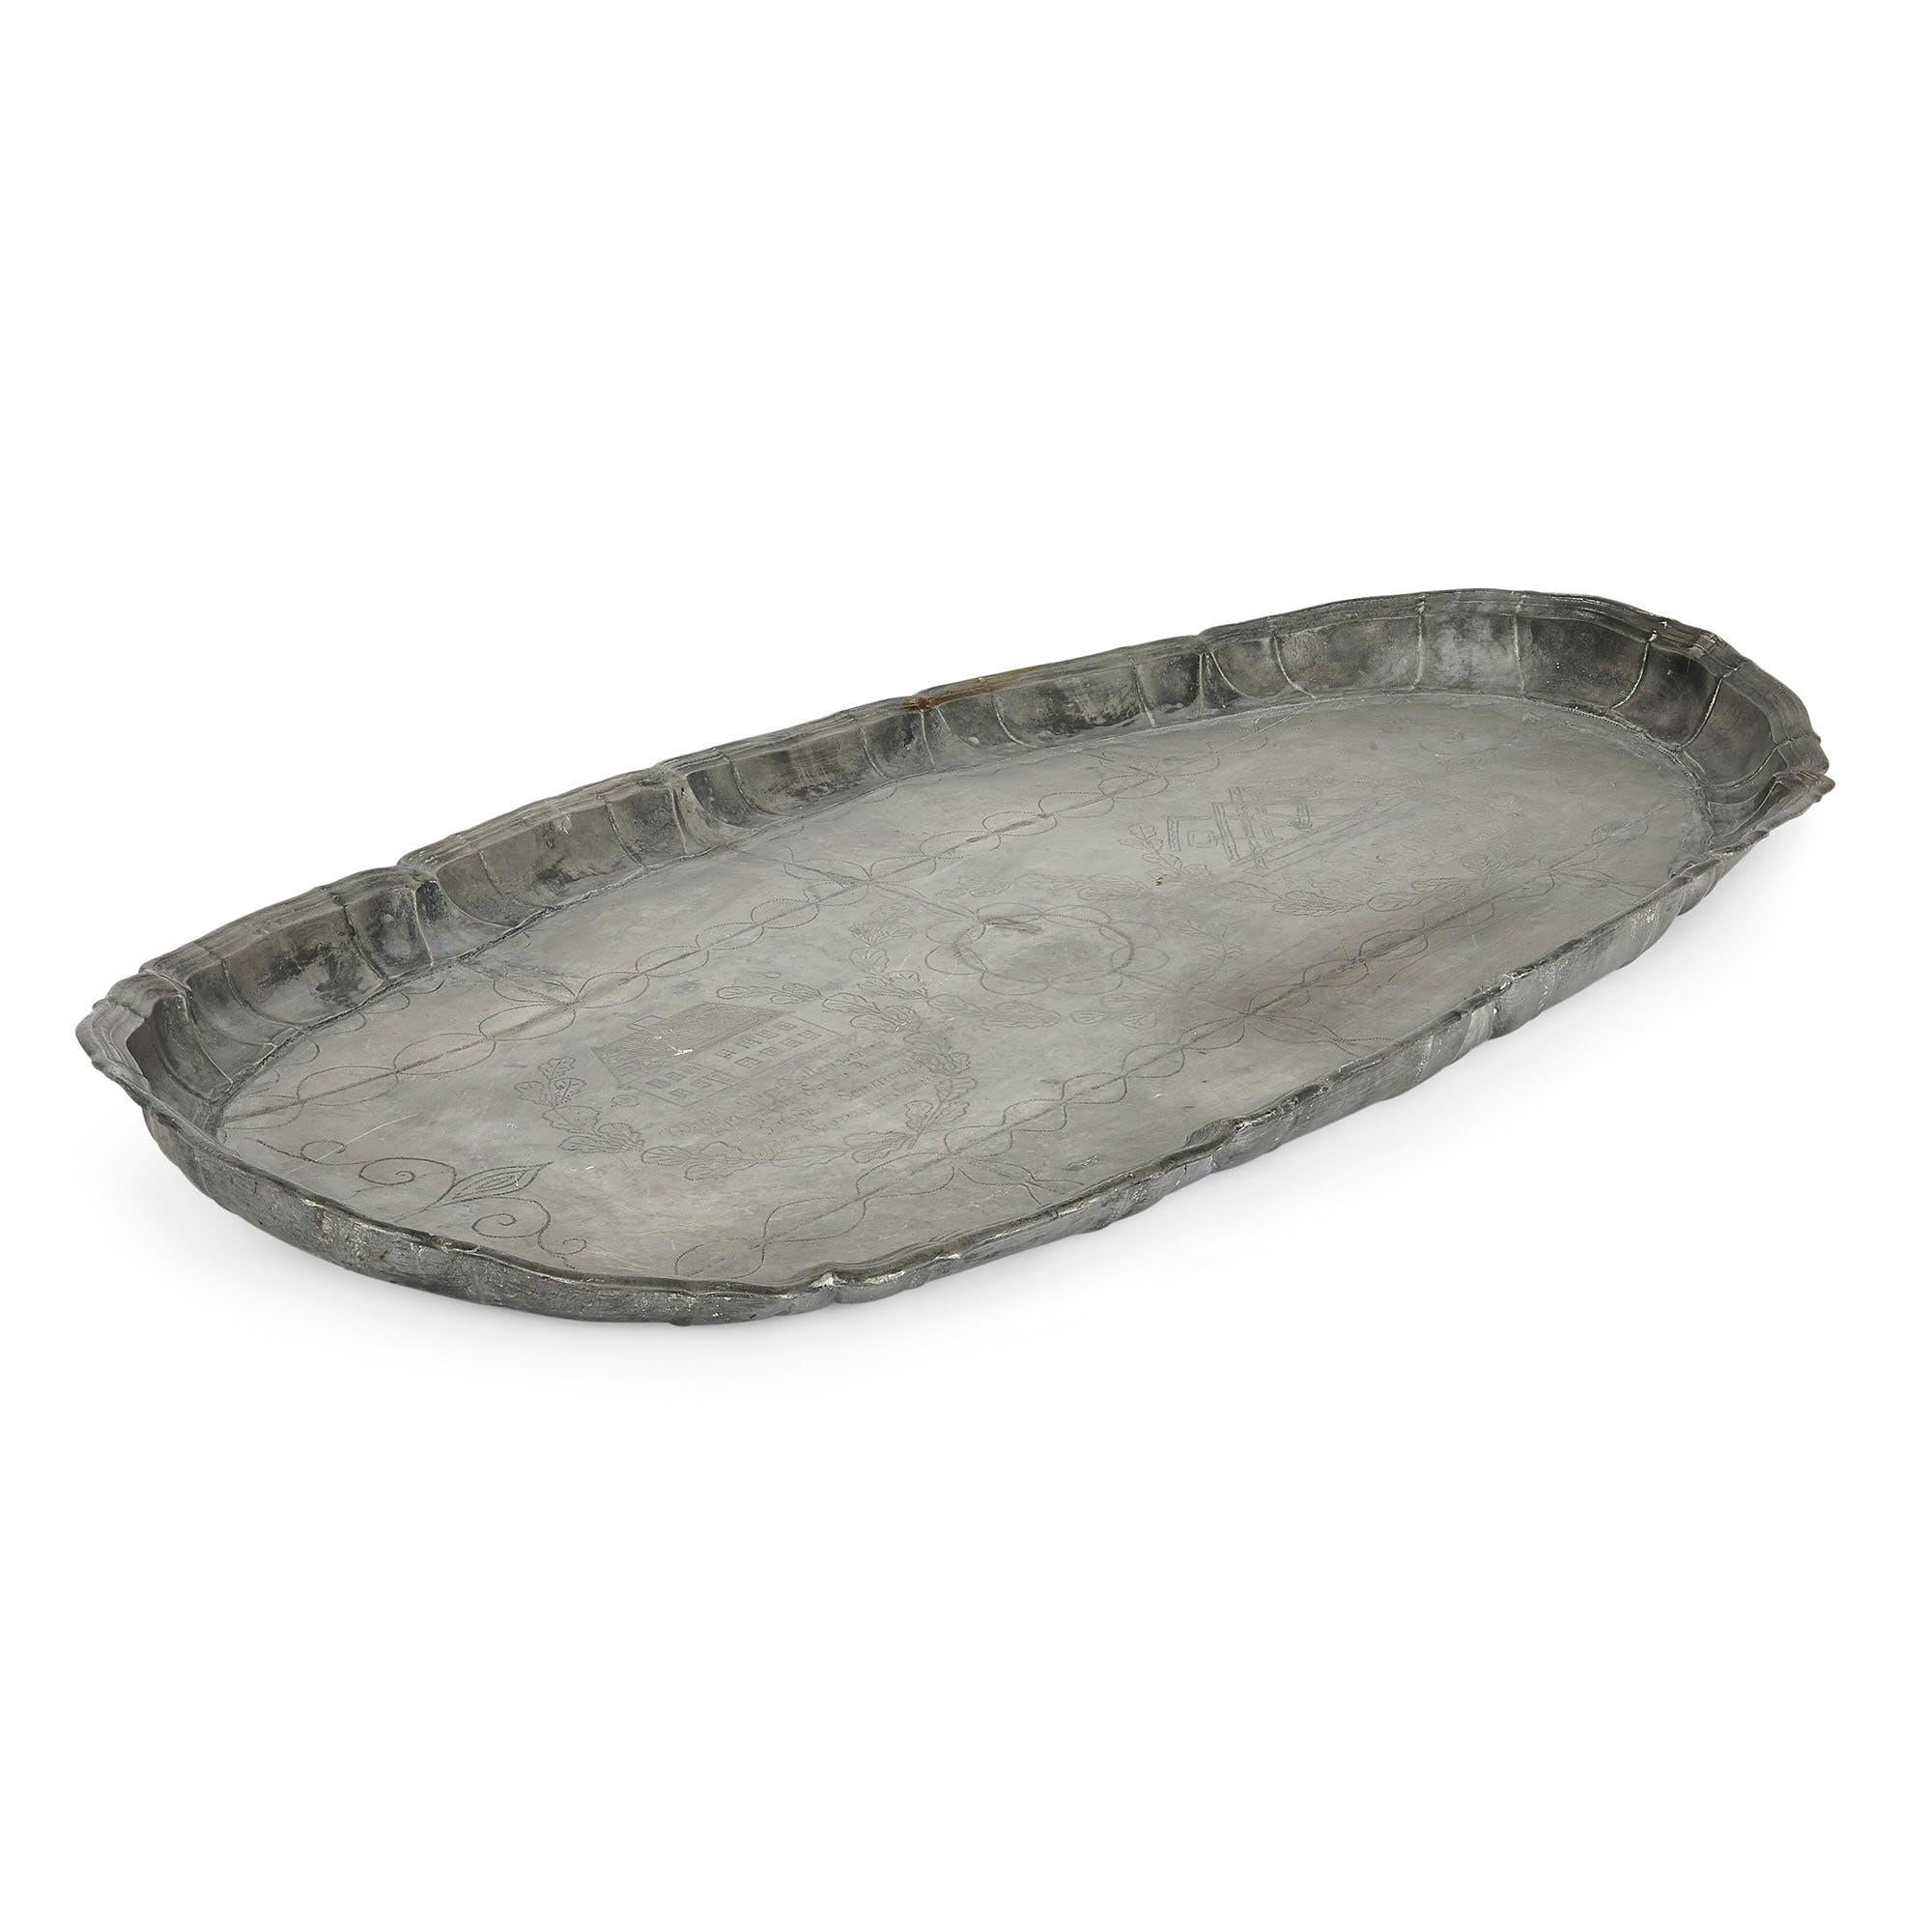 Antique German naive engraved pewter tray
German, c. 1743
Height 4.5cm, width 98cm, depth 56cm

This fine German tray is crafted from pewter, an alloy of tin long used to create decorative pieces. The tray is of irregular shape, and features a